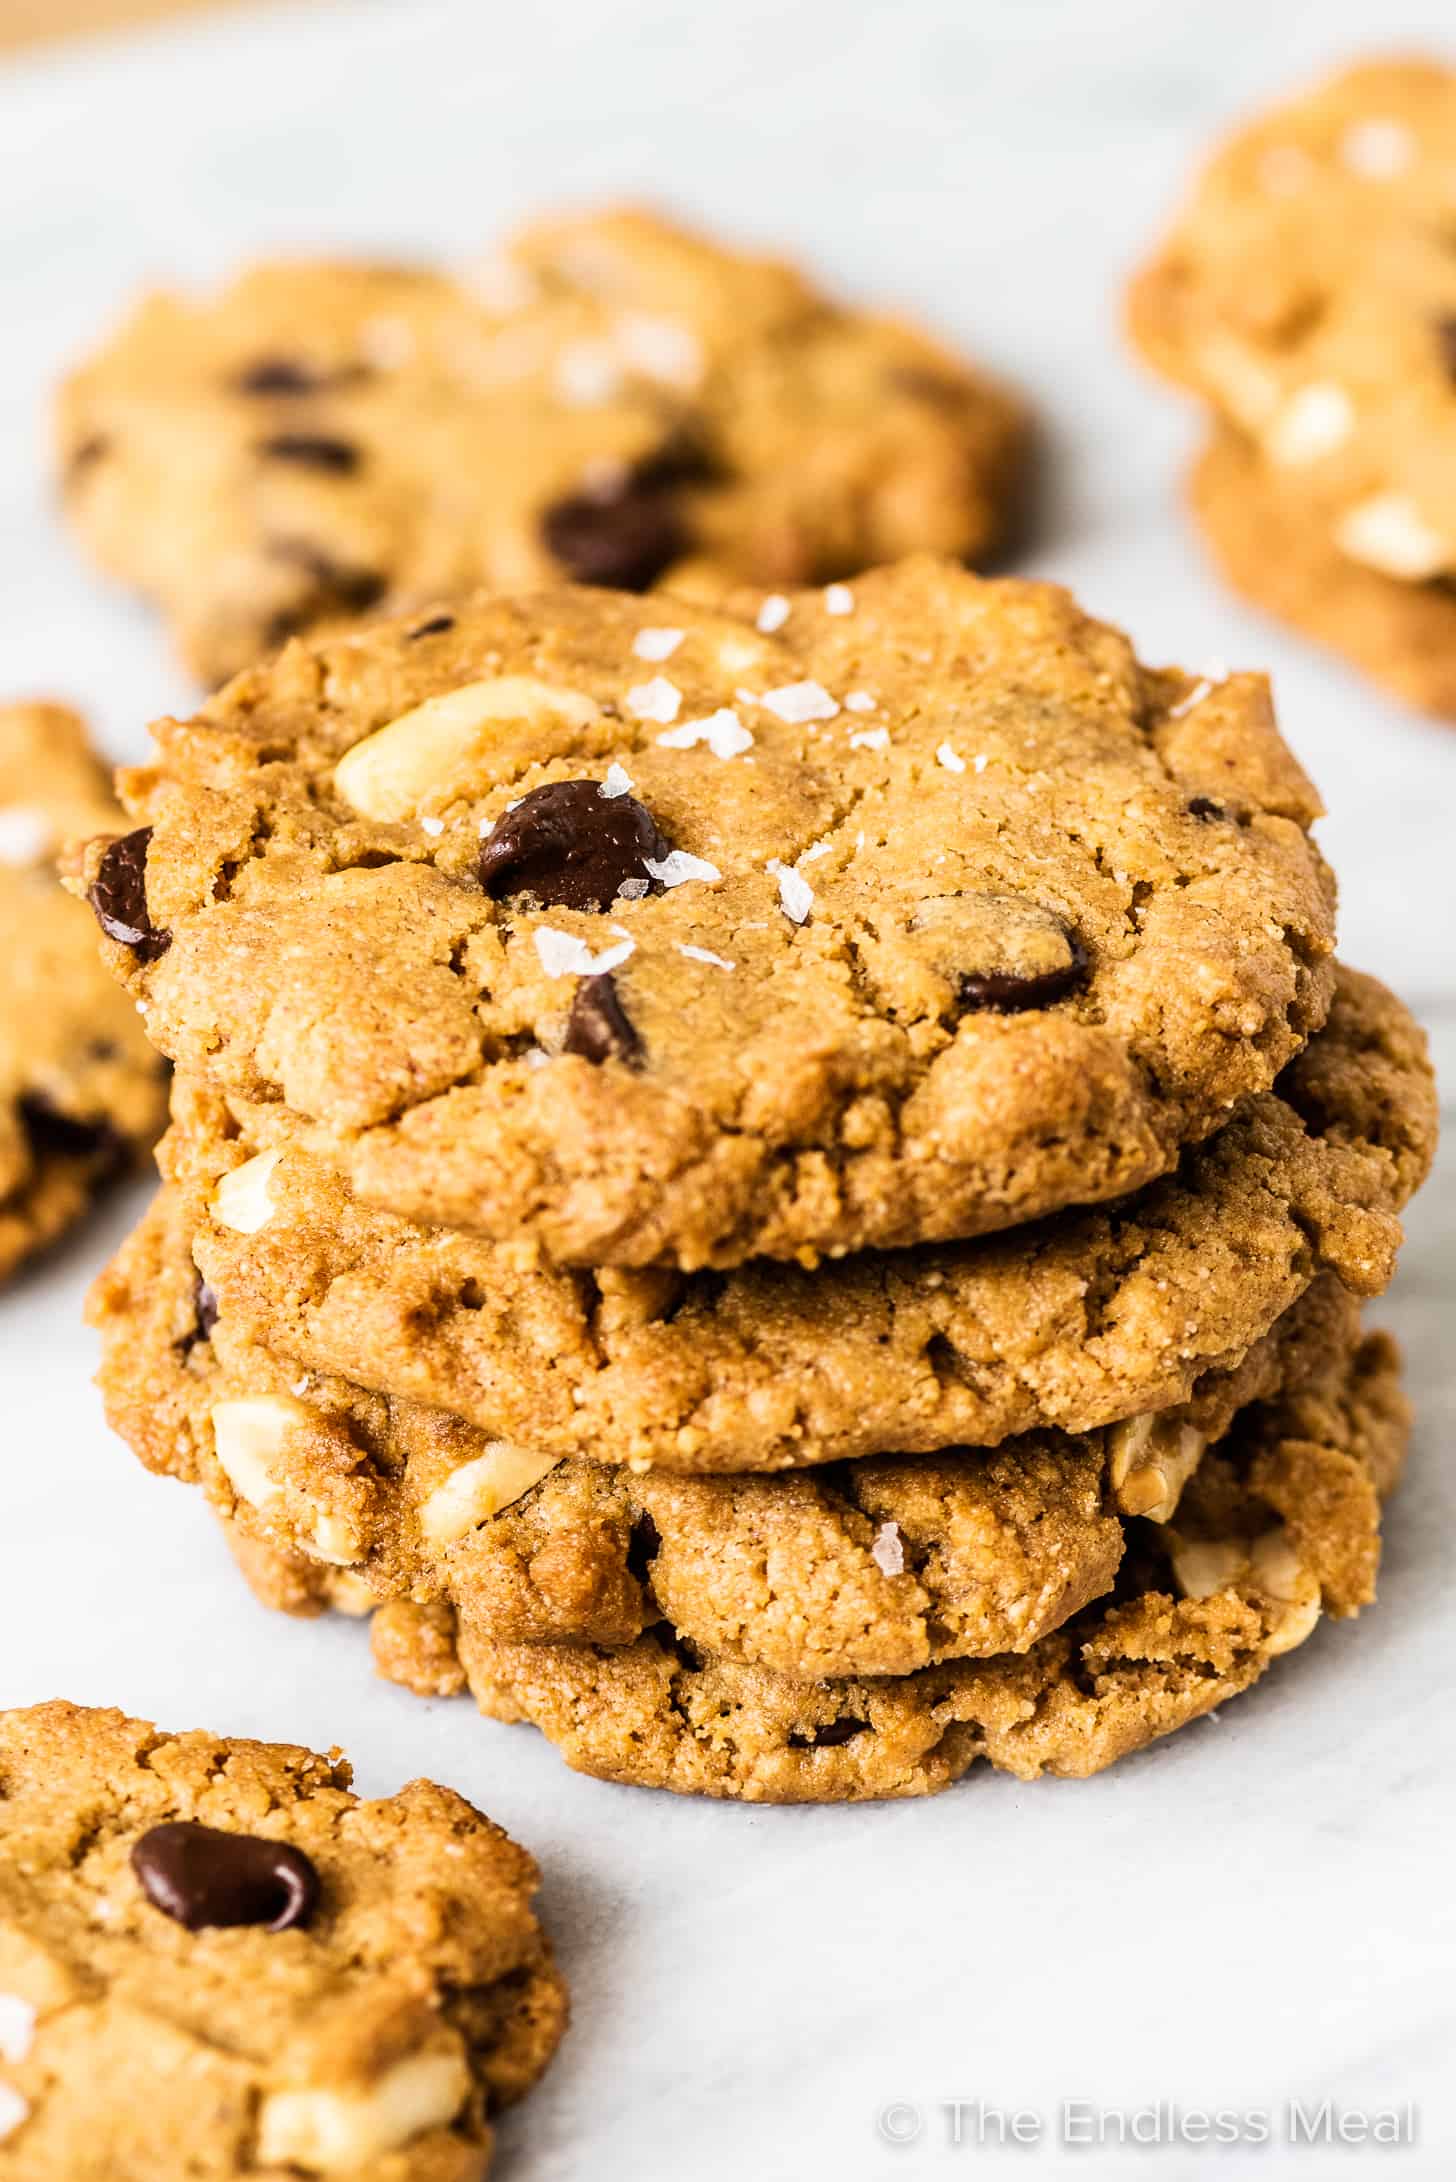 A stack of gluten free peanut butter cookies with chocolate chips.